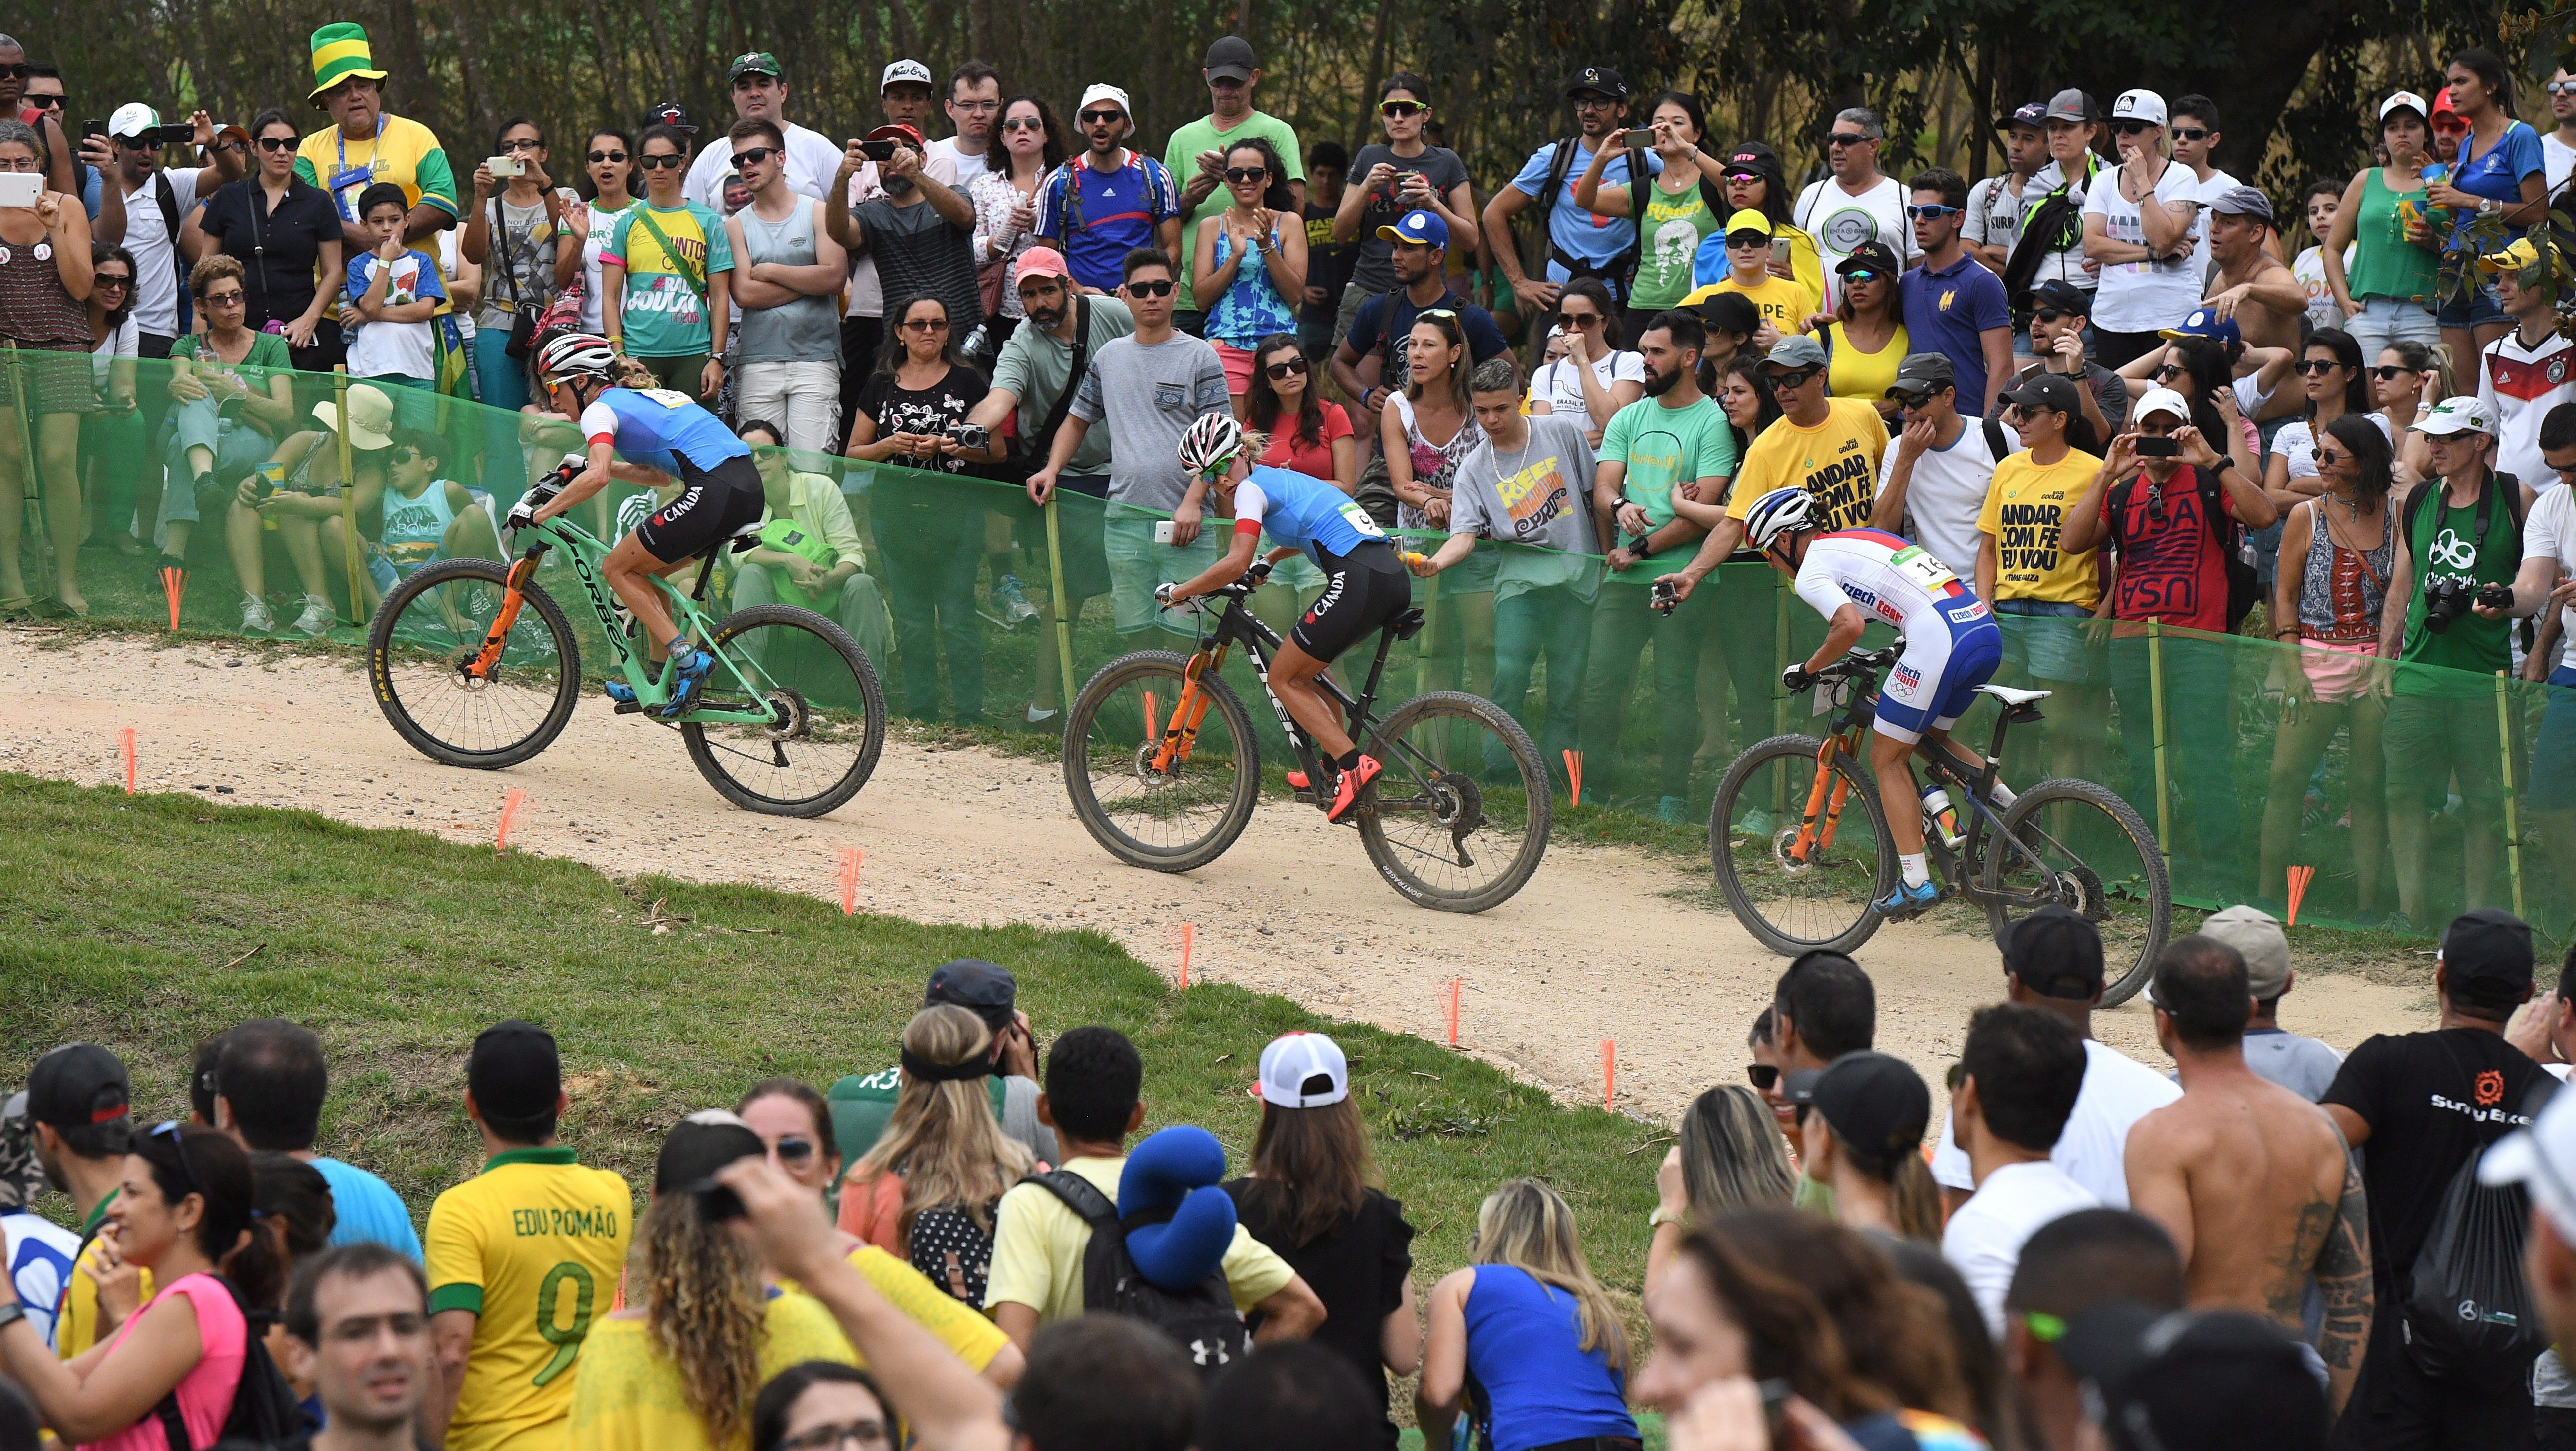 Canada's Catharine Pendrel, left to right, Emily Batty and Czech Replublic's Katerina Nash compete during the women's mountain bike final at the 2016 Olympic Summer Games in Rio de Janeiro, Brazil on Saturday, Aug. 20, 2016. THE CANADIAN PRESS/Sean Kilpatrick